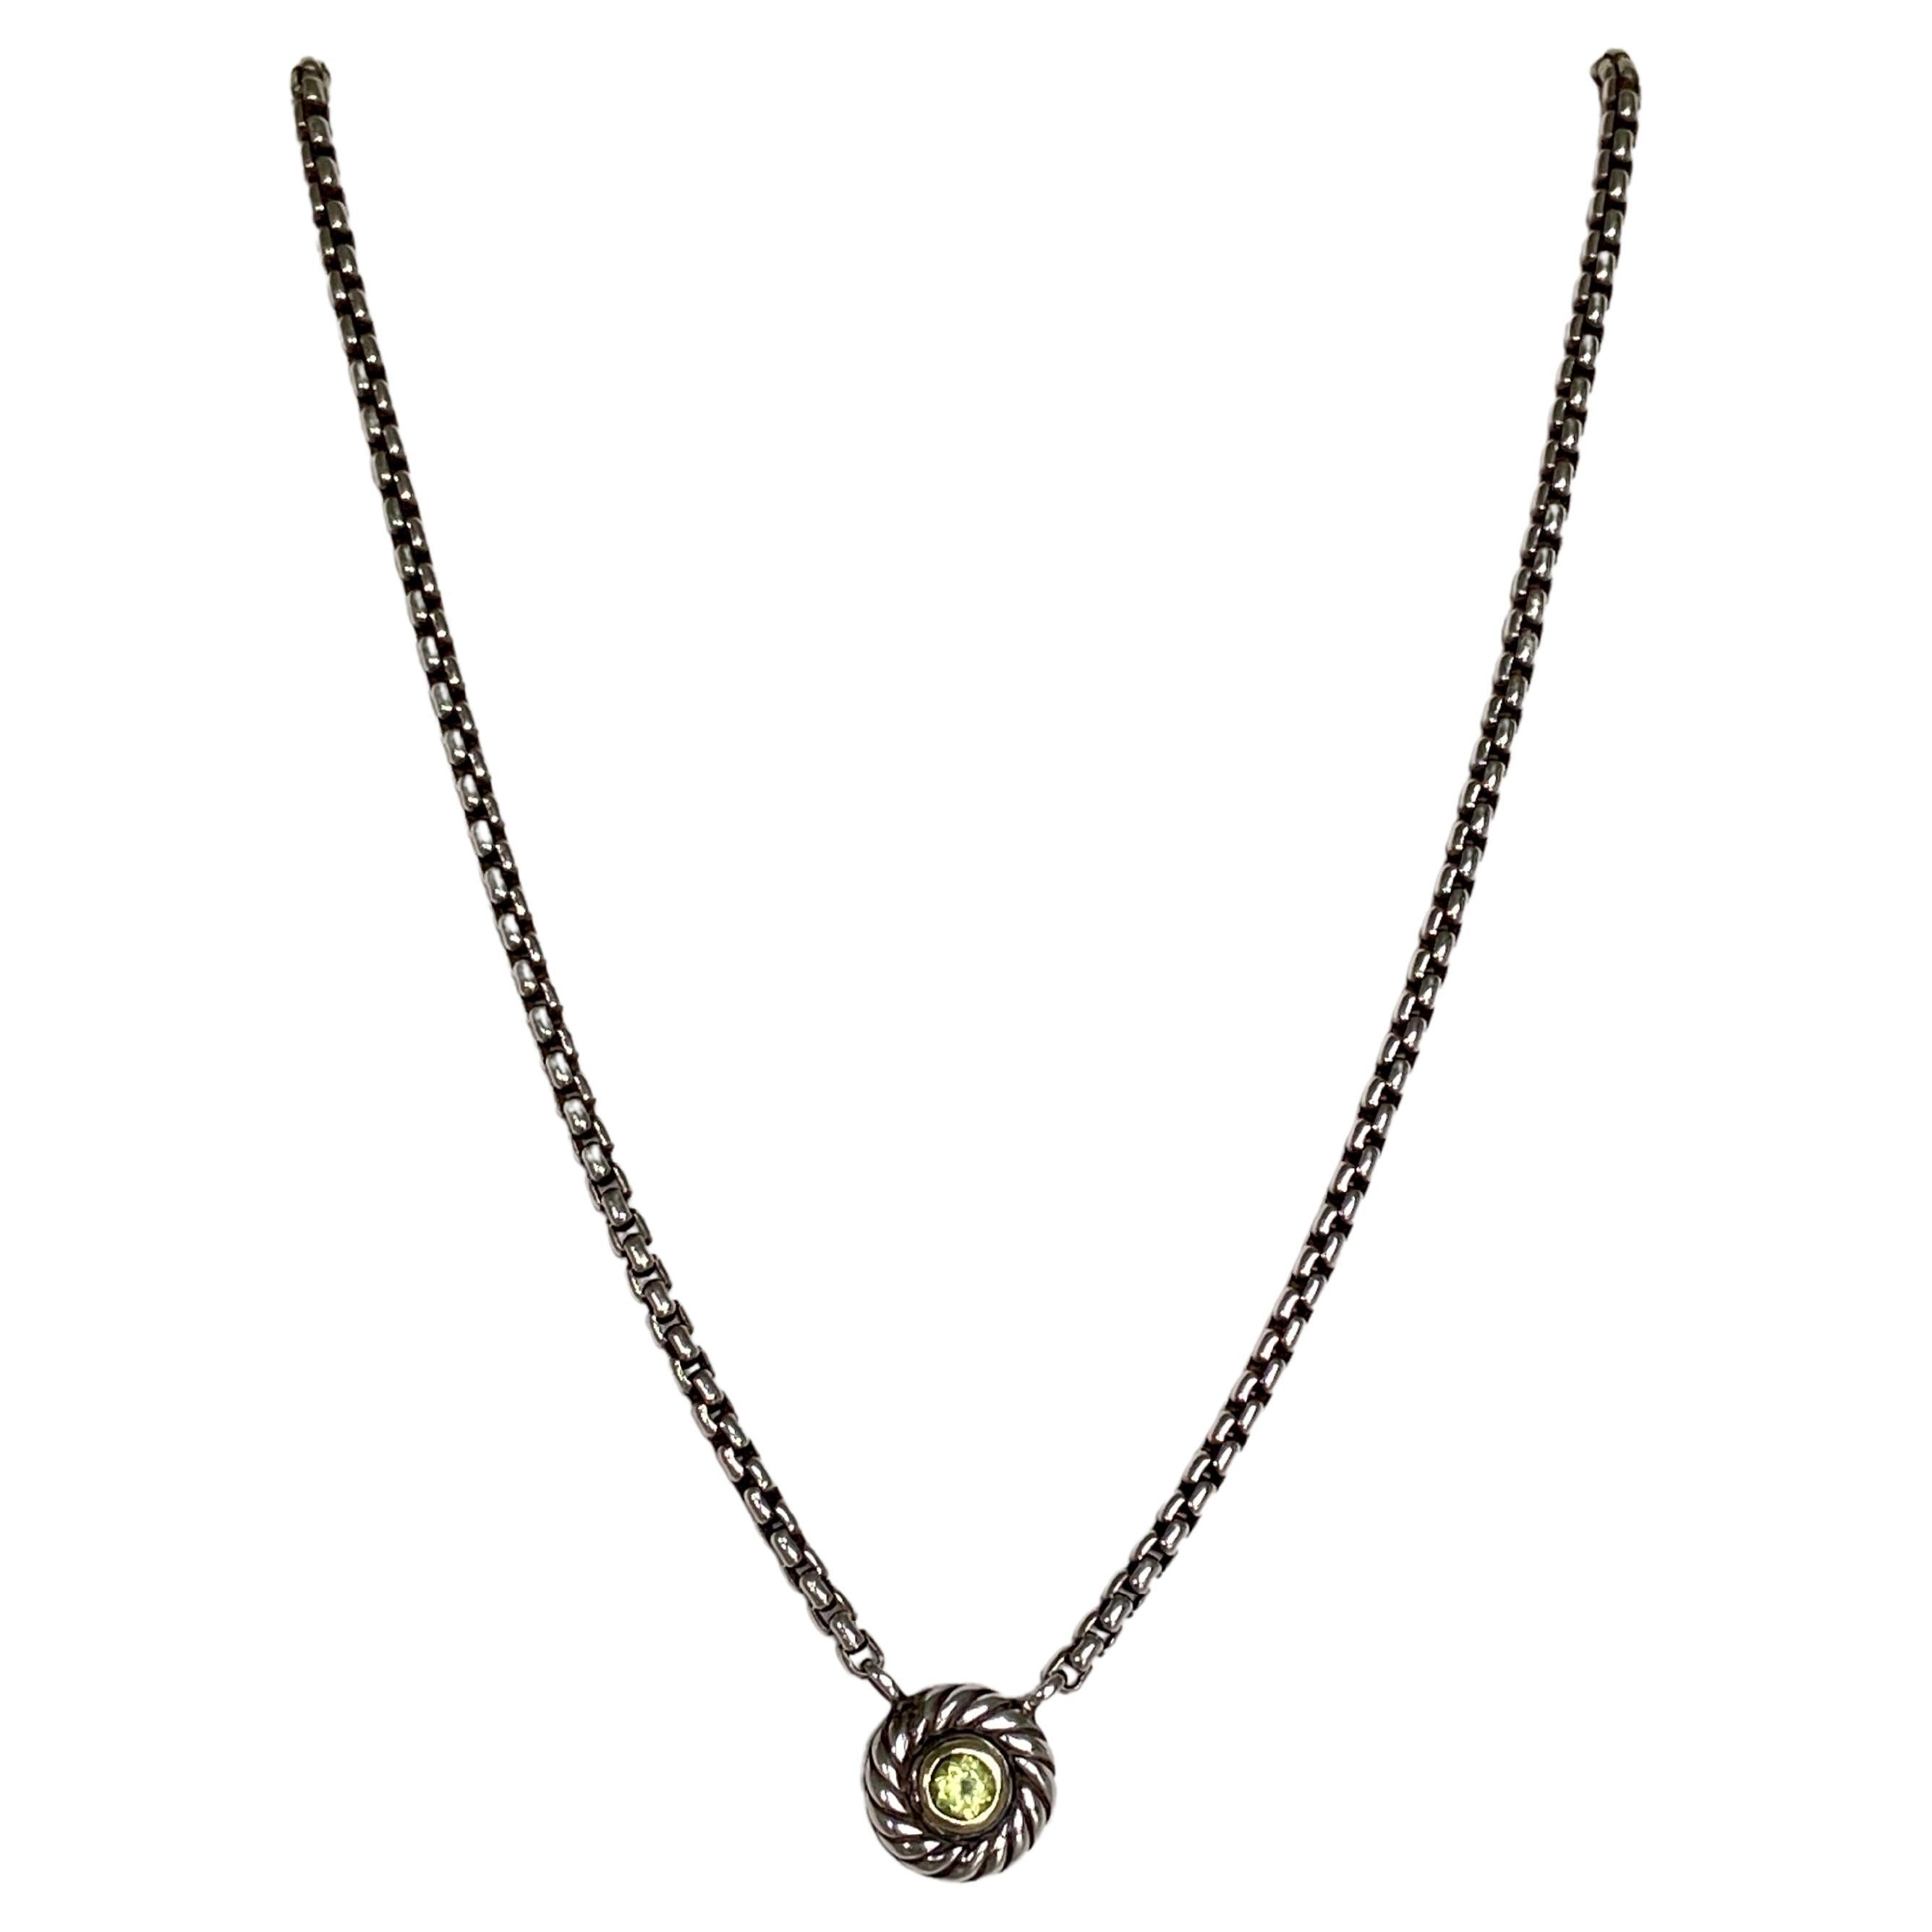 Sterling Silver and 18k Gold David Yurman Peridot "Cookie" Necklace